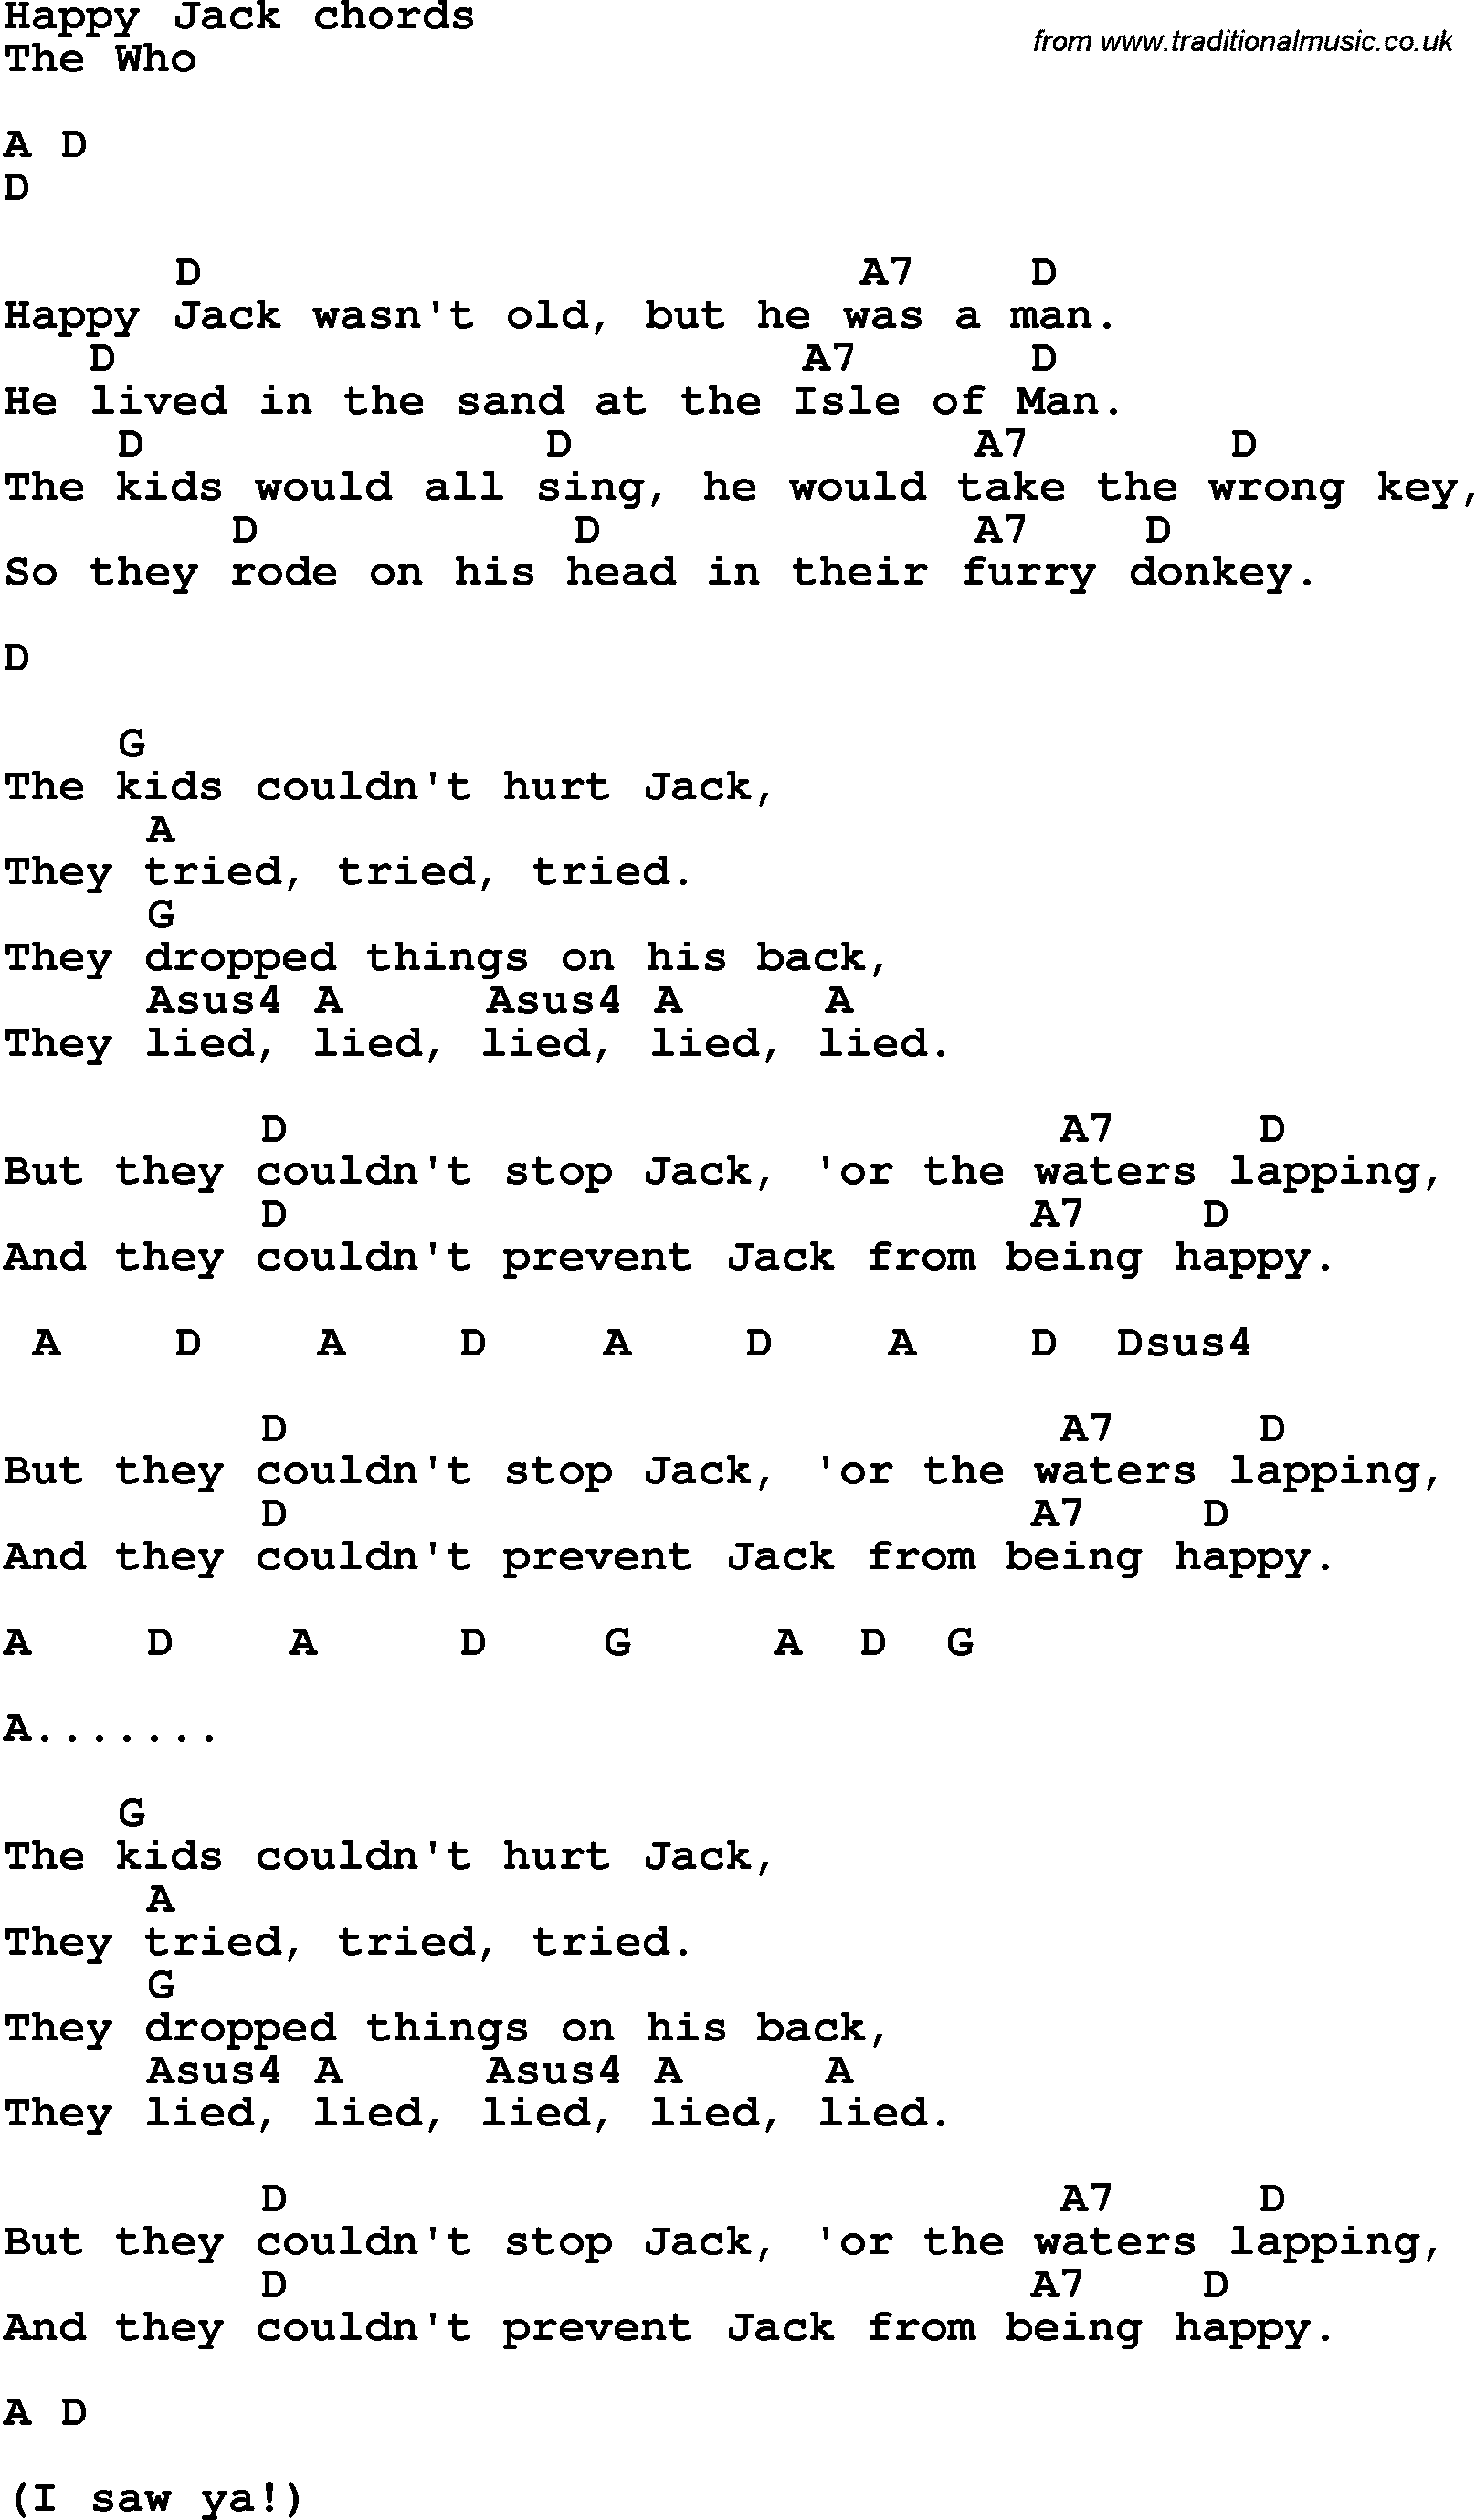 Song Lyrics with guitar chords for Happy Jack